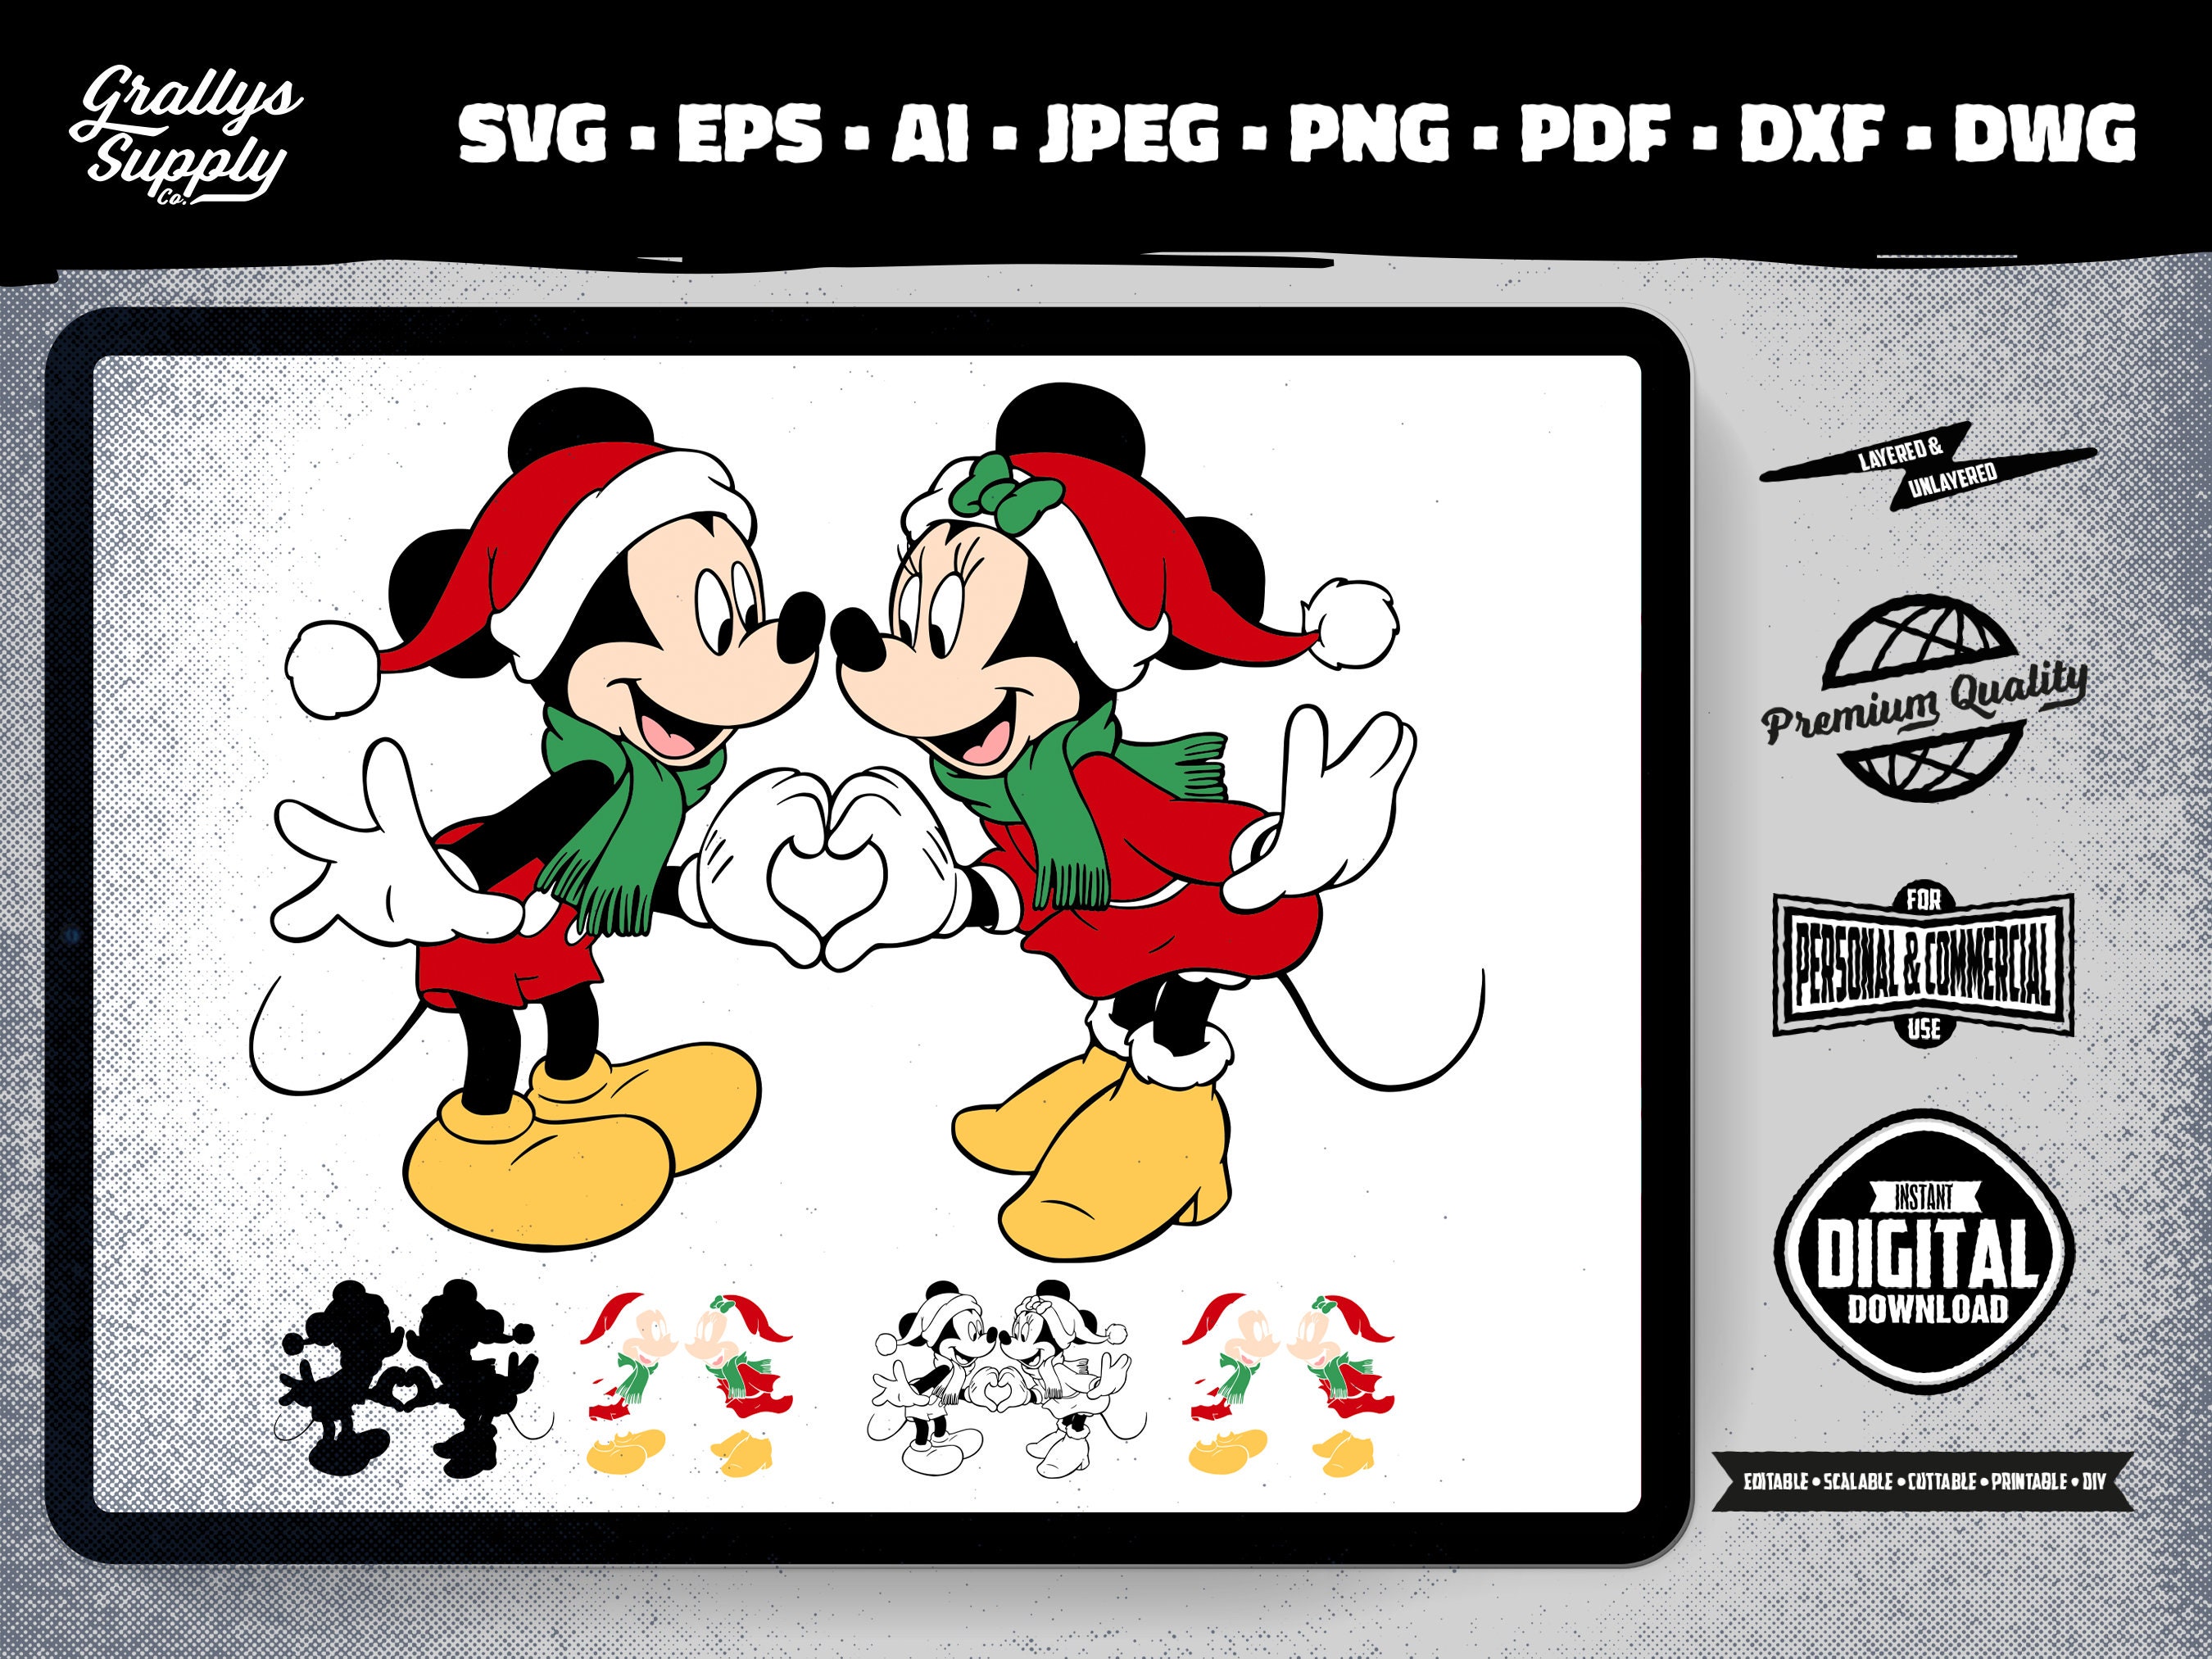 mickey mouse & minnie mouse christmas 12 items in SVG, jpg ,Pdf ,Png and  Eps digital download